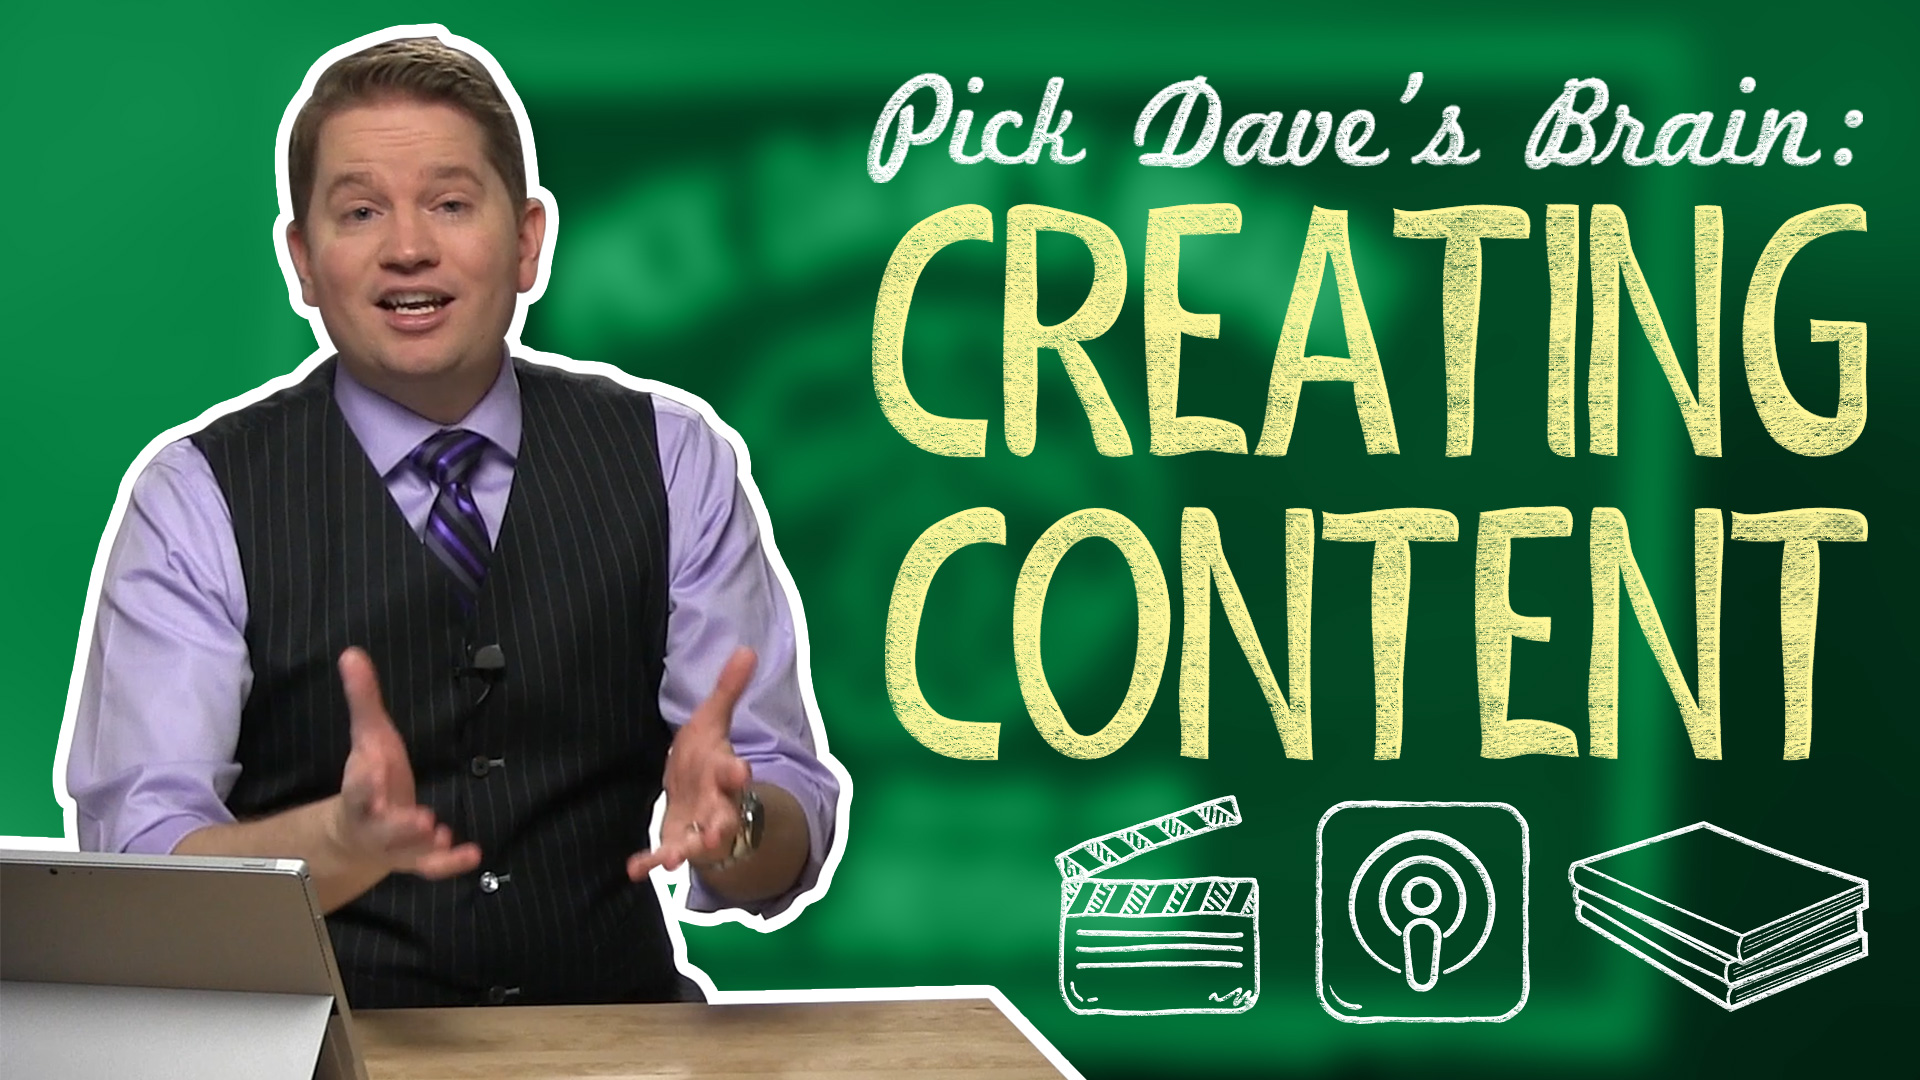 How to Be the ‘Guru’ by Creating Content – Pick Dave’s Brain